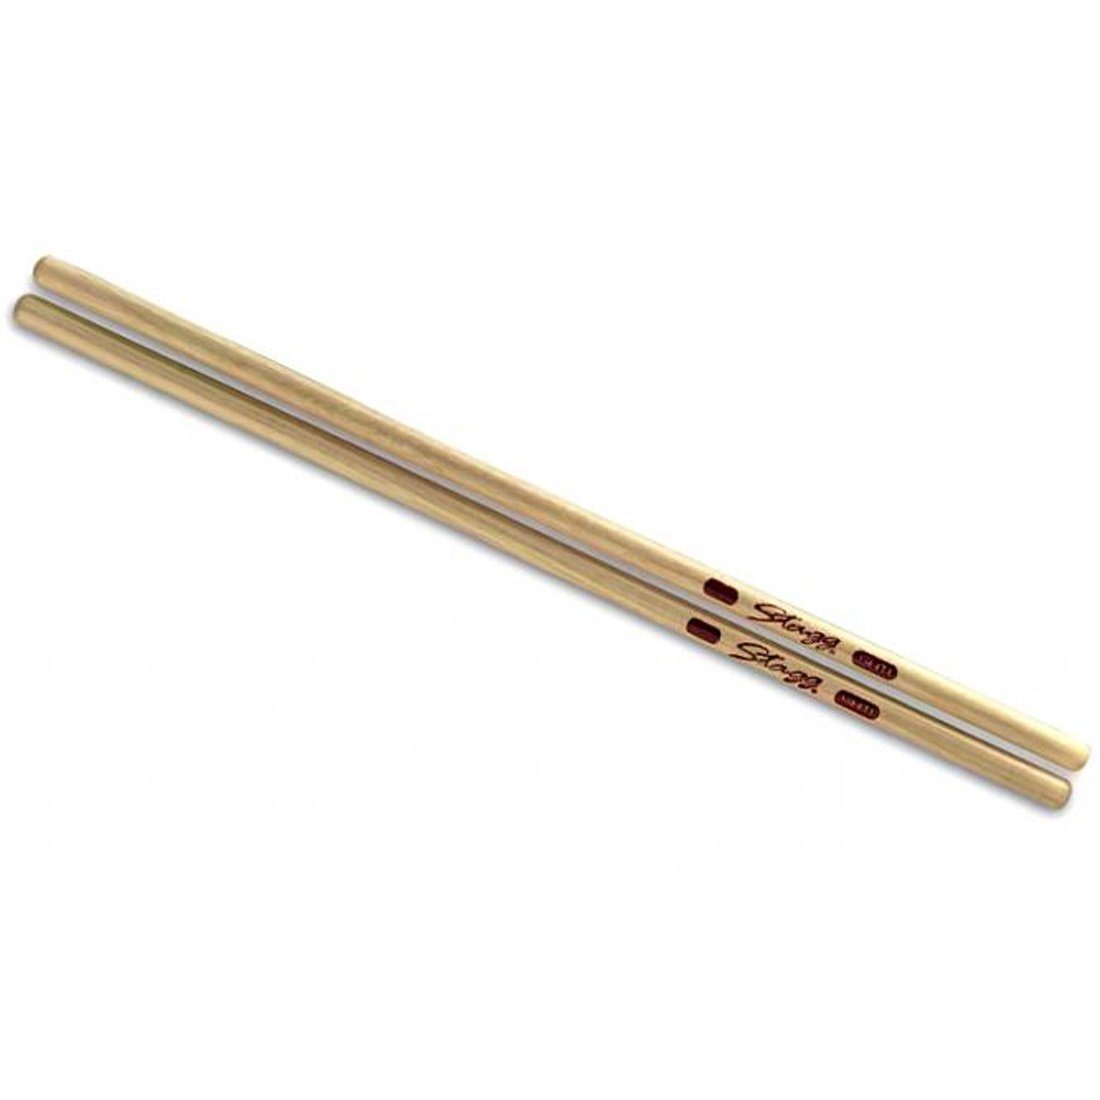 Stagg Schlagzeug Stagg SHT Timbale Sticks Percussion Drumsticks